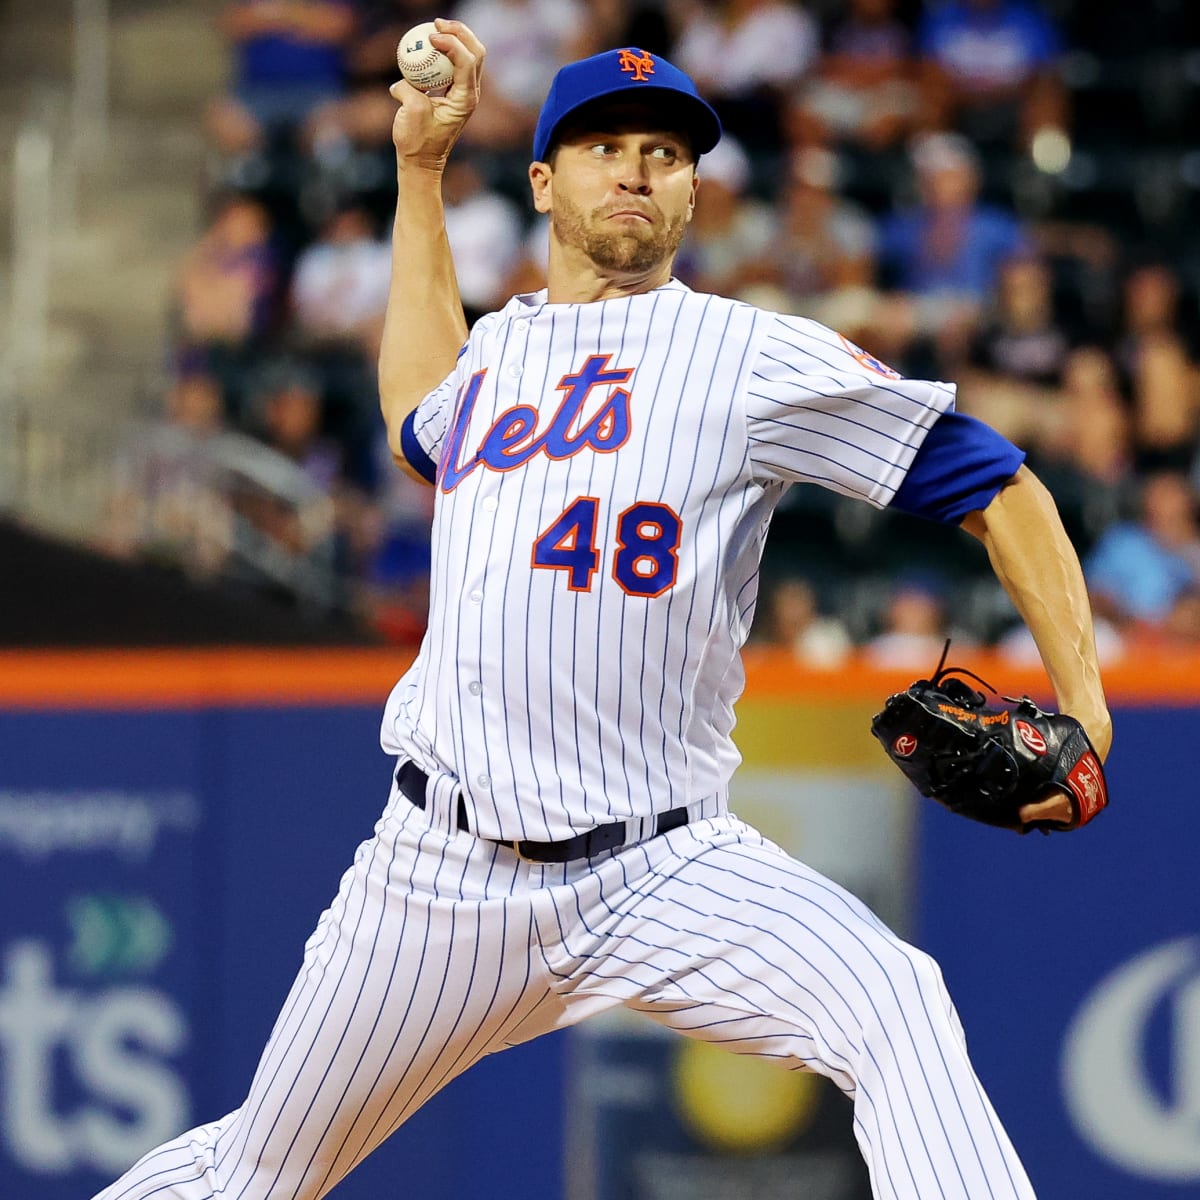 Jacob deGrom's Net Worth in 2022